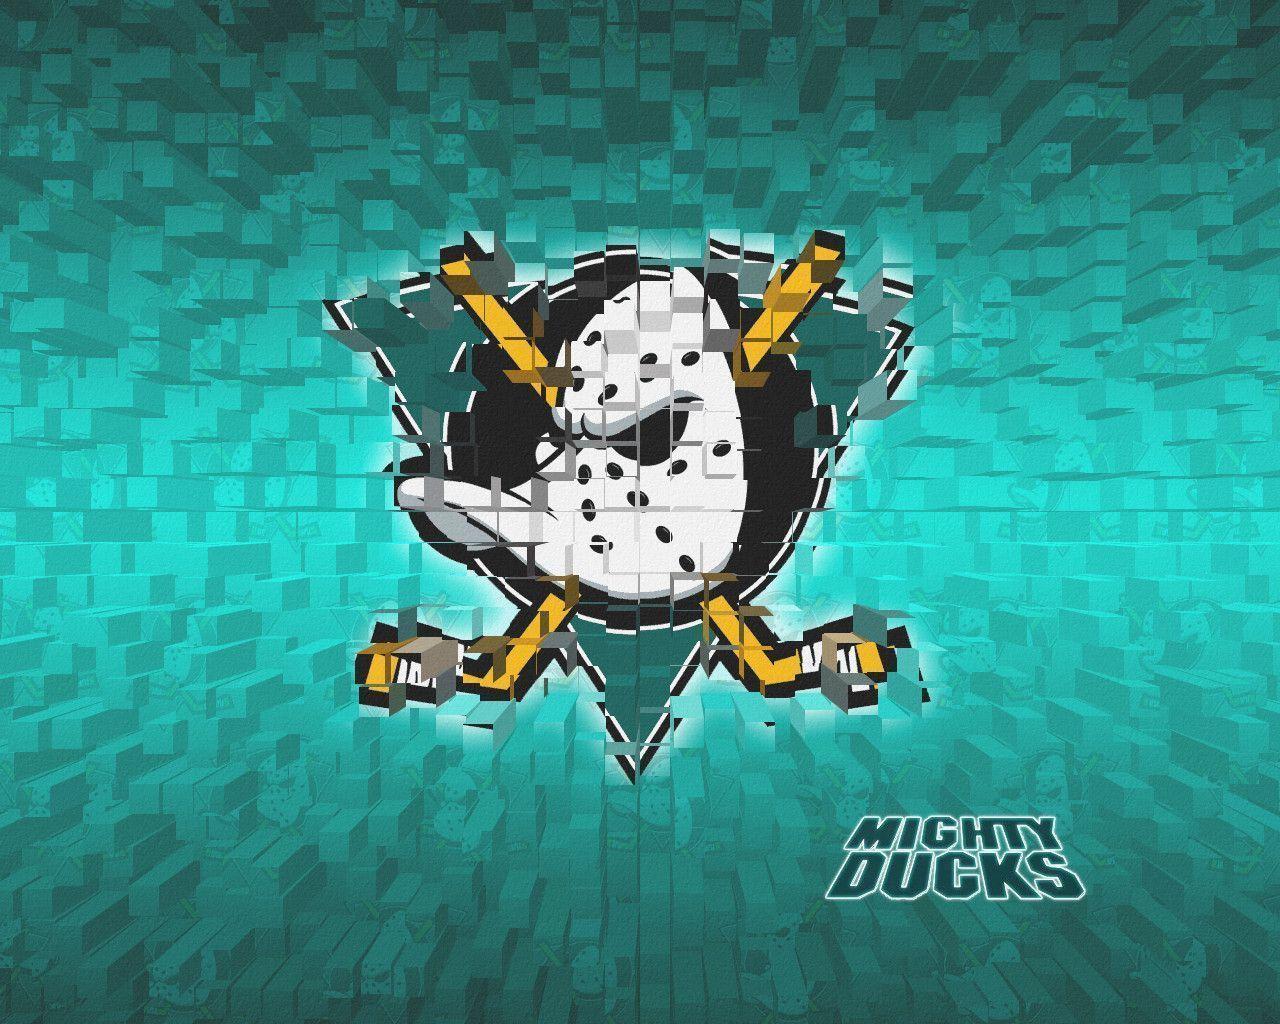 Anaheim Ducks on Twitter  Wallpaper Wednesday  Your choice between  Terry and our badge FlyTogether  8x8 httpstcoqL2URuSL6U  Twitter